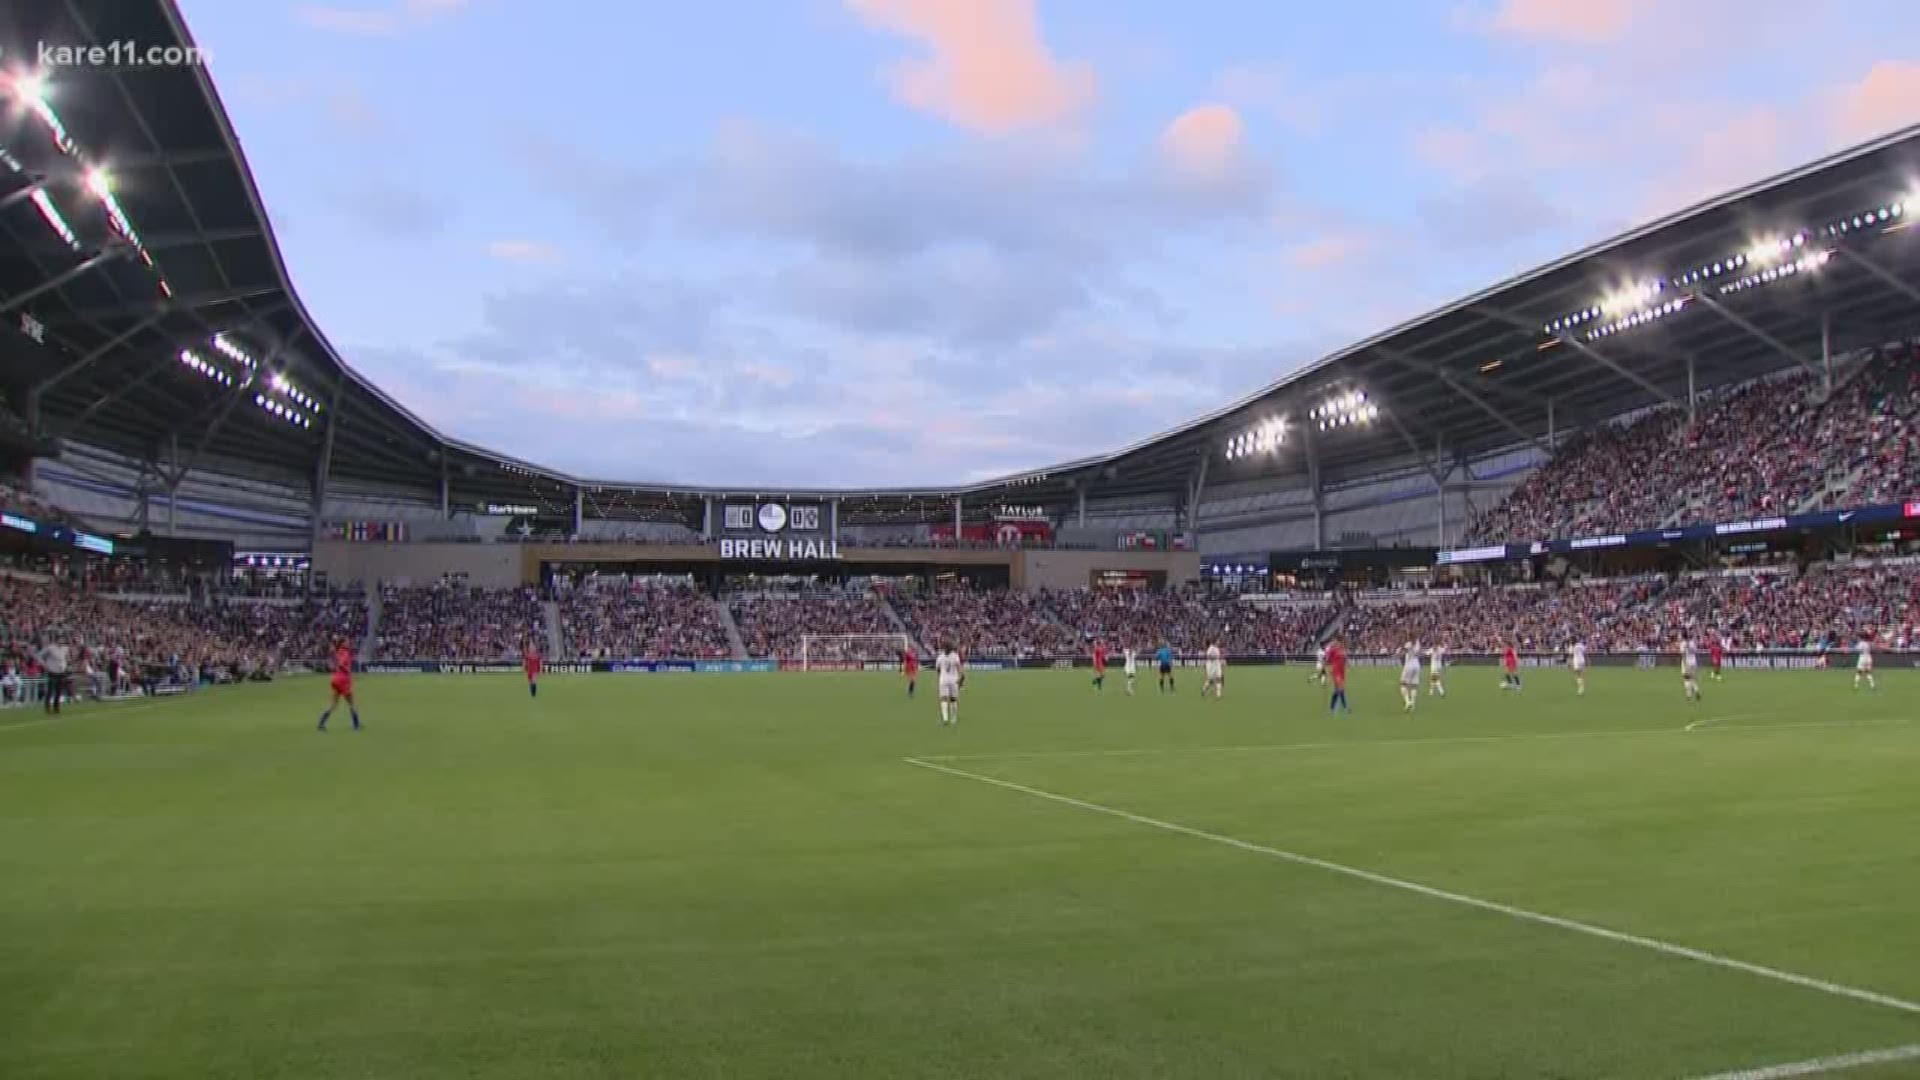 Allianz Field was buzzing tonight as the U.S. women's national soccer team played in front of a sold out crowd.